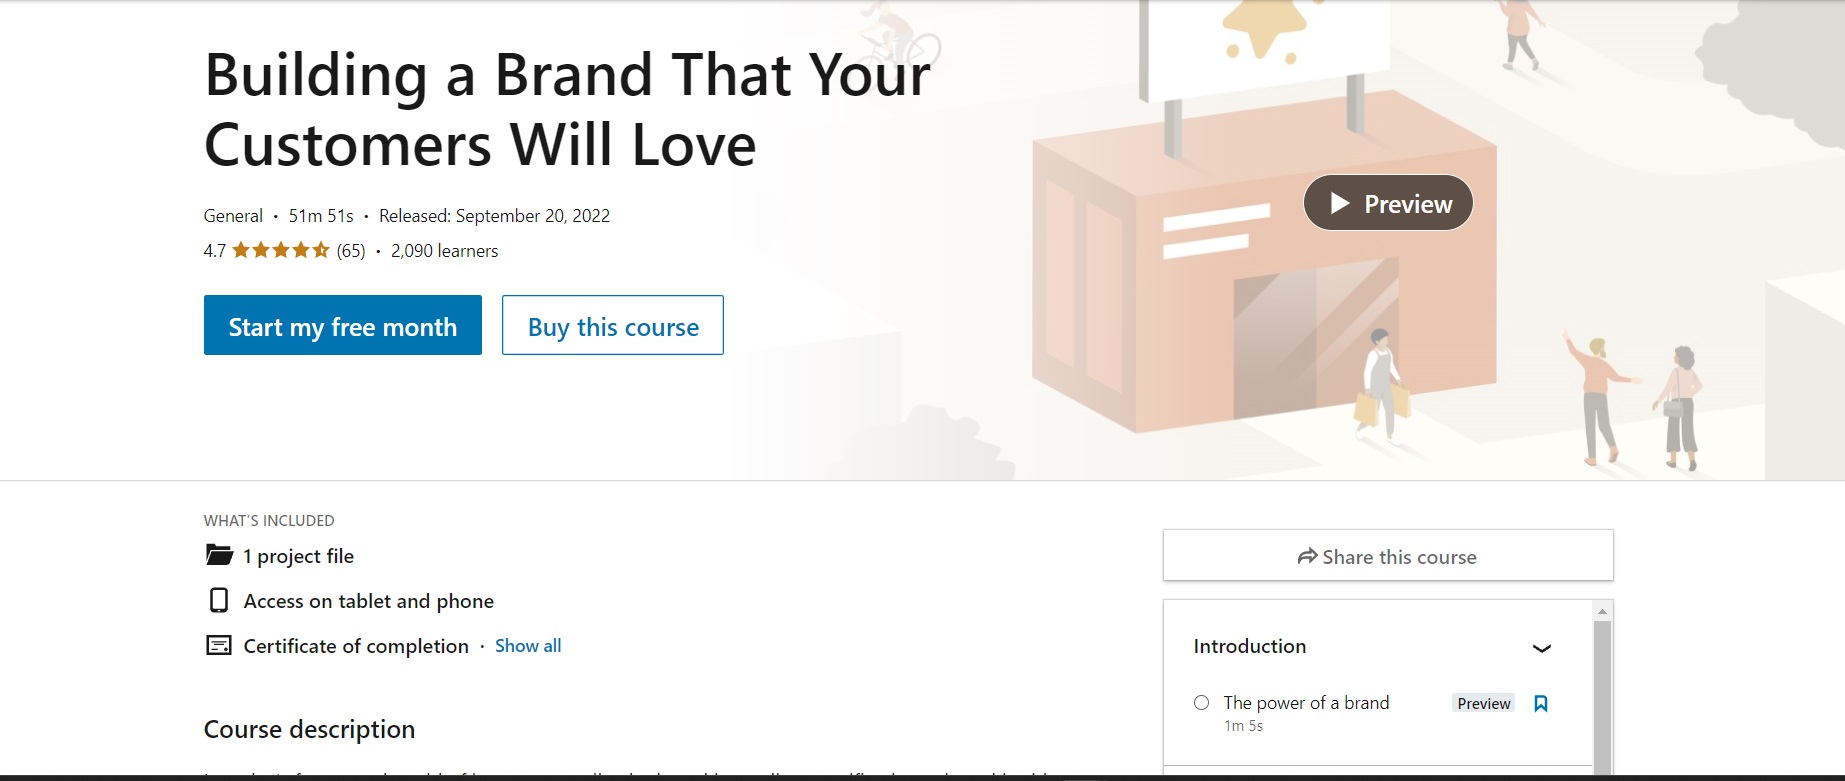 Building A Brand That Your Customers Will Love